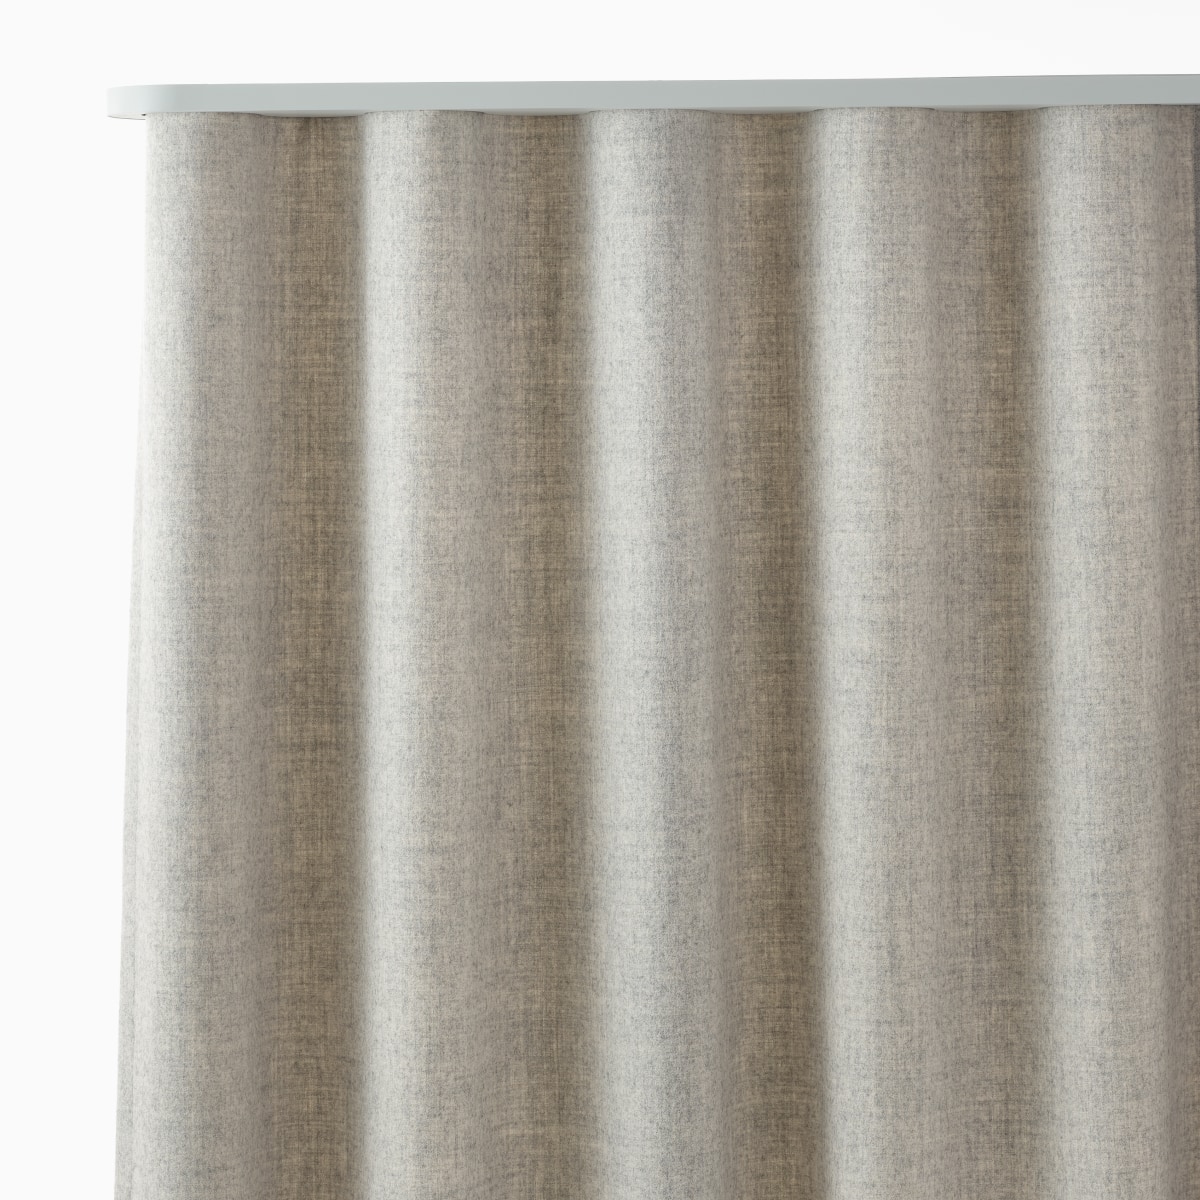 Detail of a light brown OE1 Freestanding Curtain, viewed from the top and front.